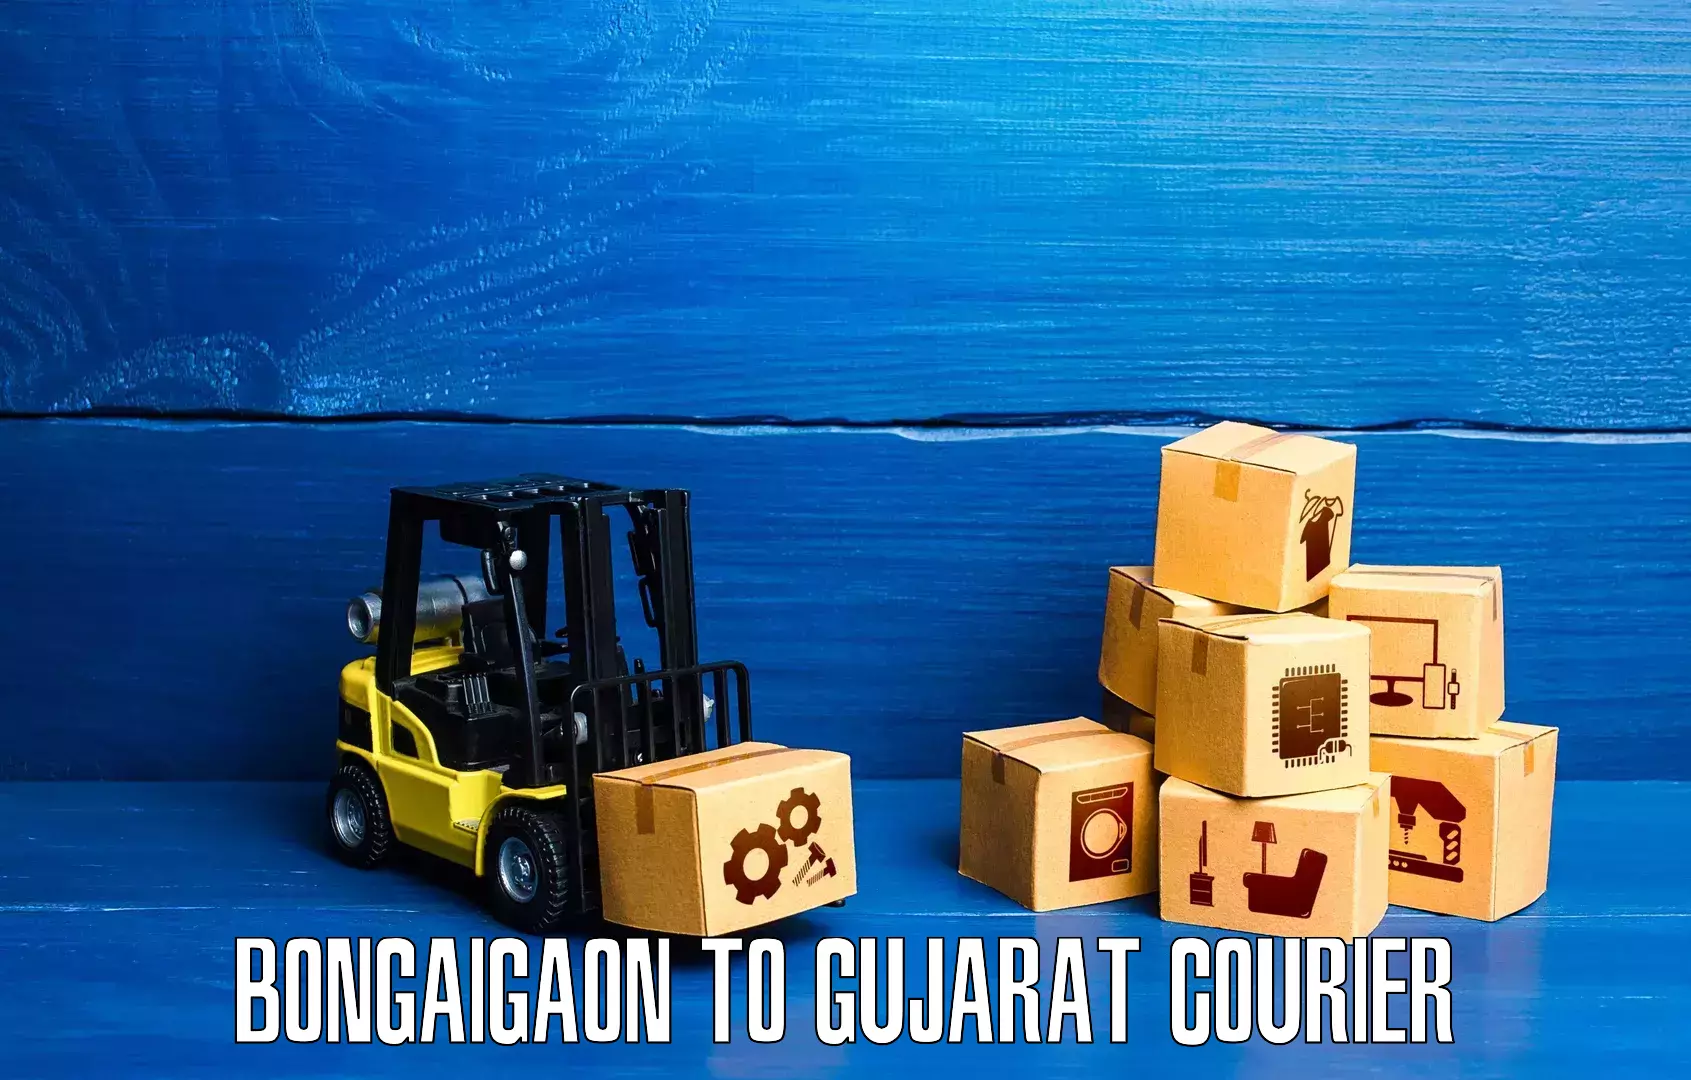 State-of-the-art courier technology Bongaigaon to Dhandhuka